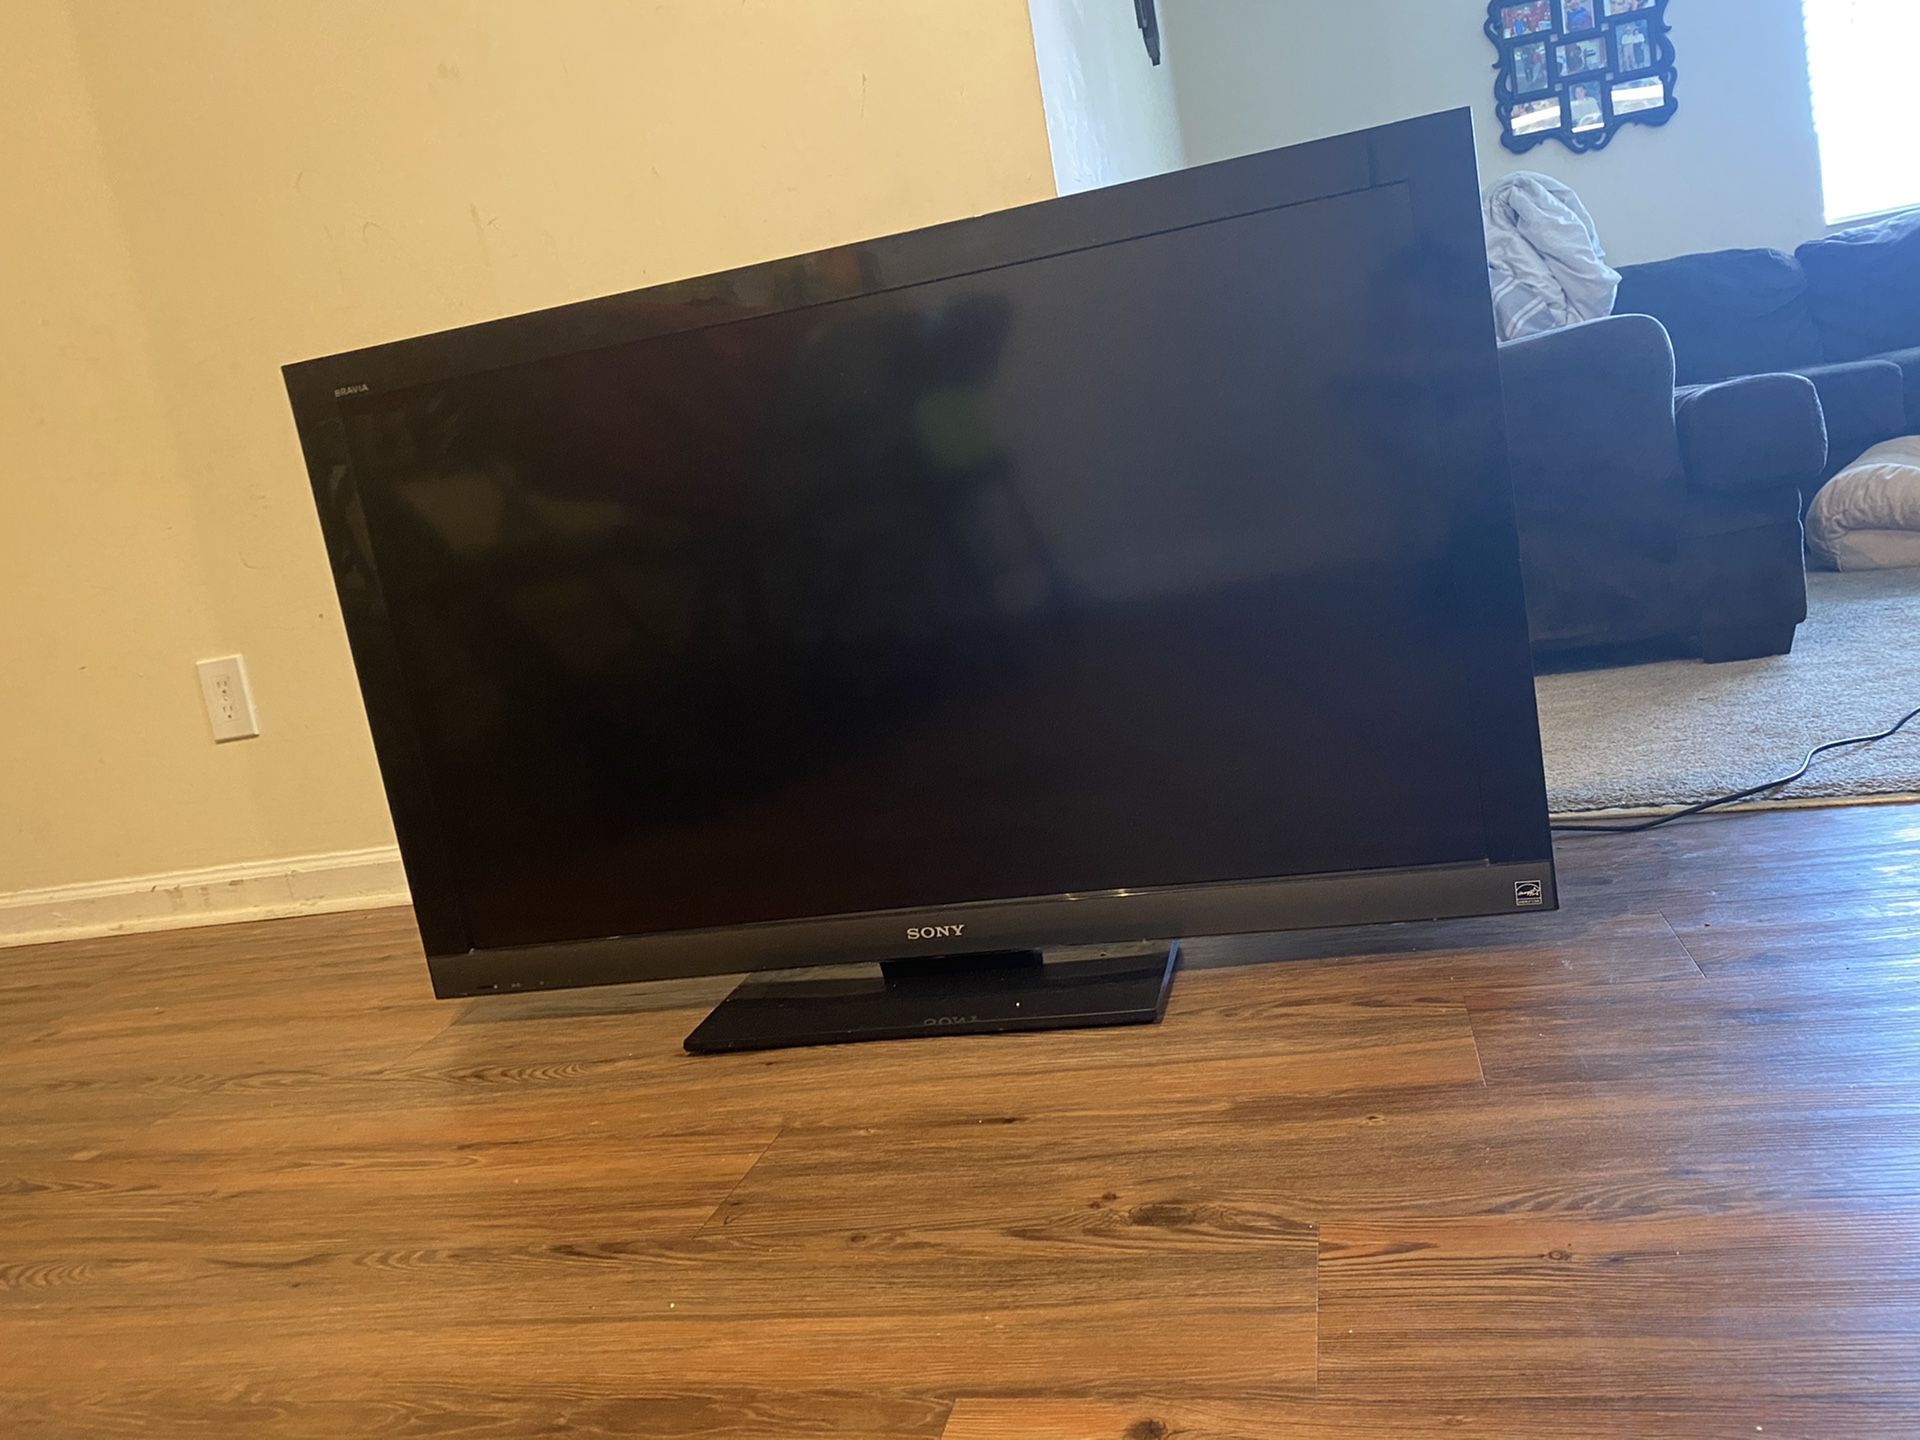 its a sony 46 inch tv